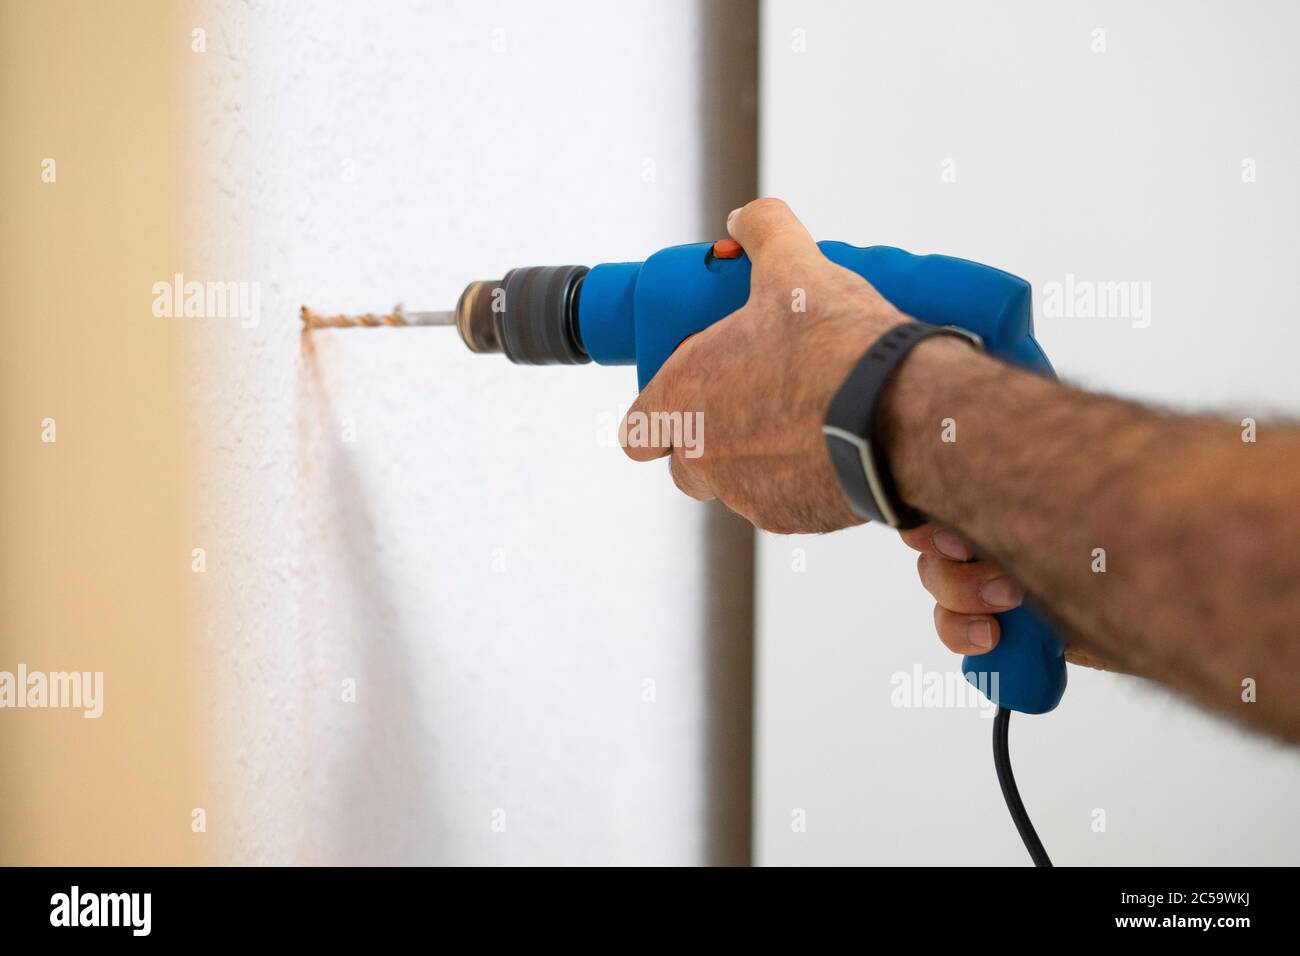 Drilling A Hole In The Wall With A Drill Stock Photo - Download Image Now -  Color Image, Craft, Drill - iStock